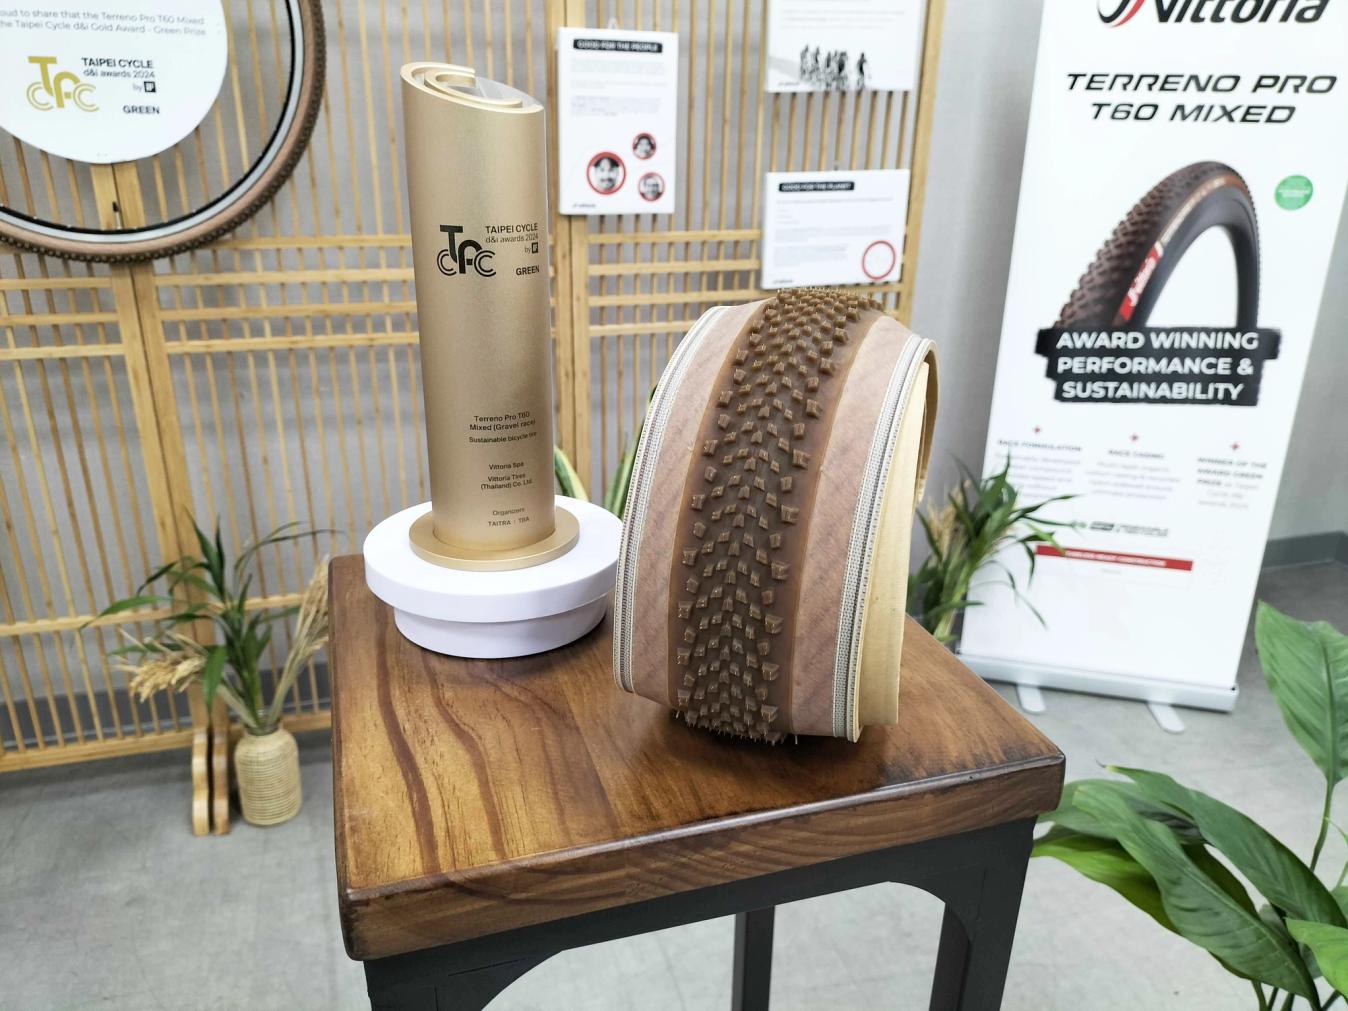 Vittoria's new Terreno tyre, which hasn't officially been released just yet, won the green award at the Taipei Cycle Show